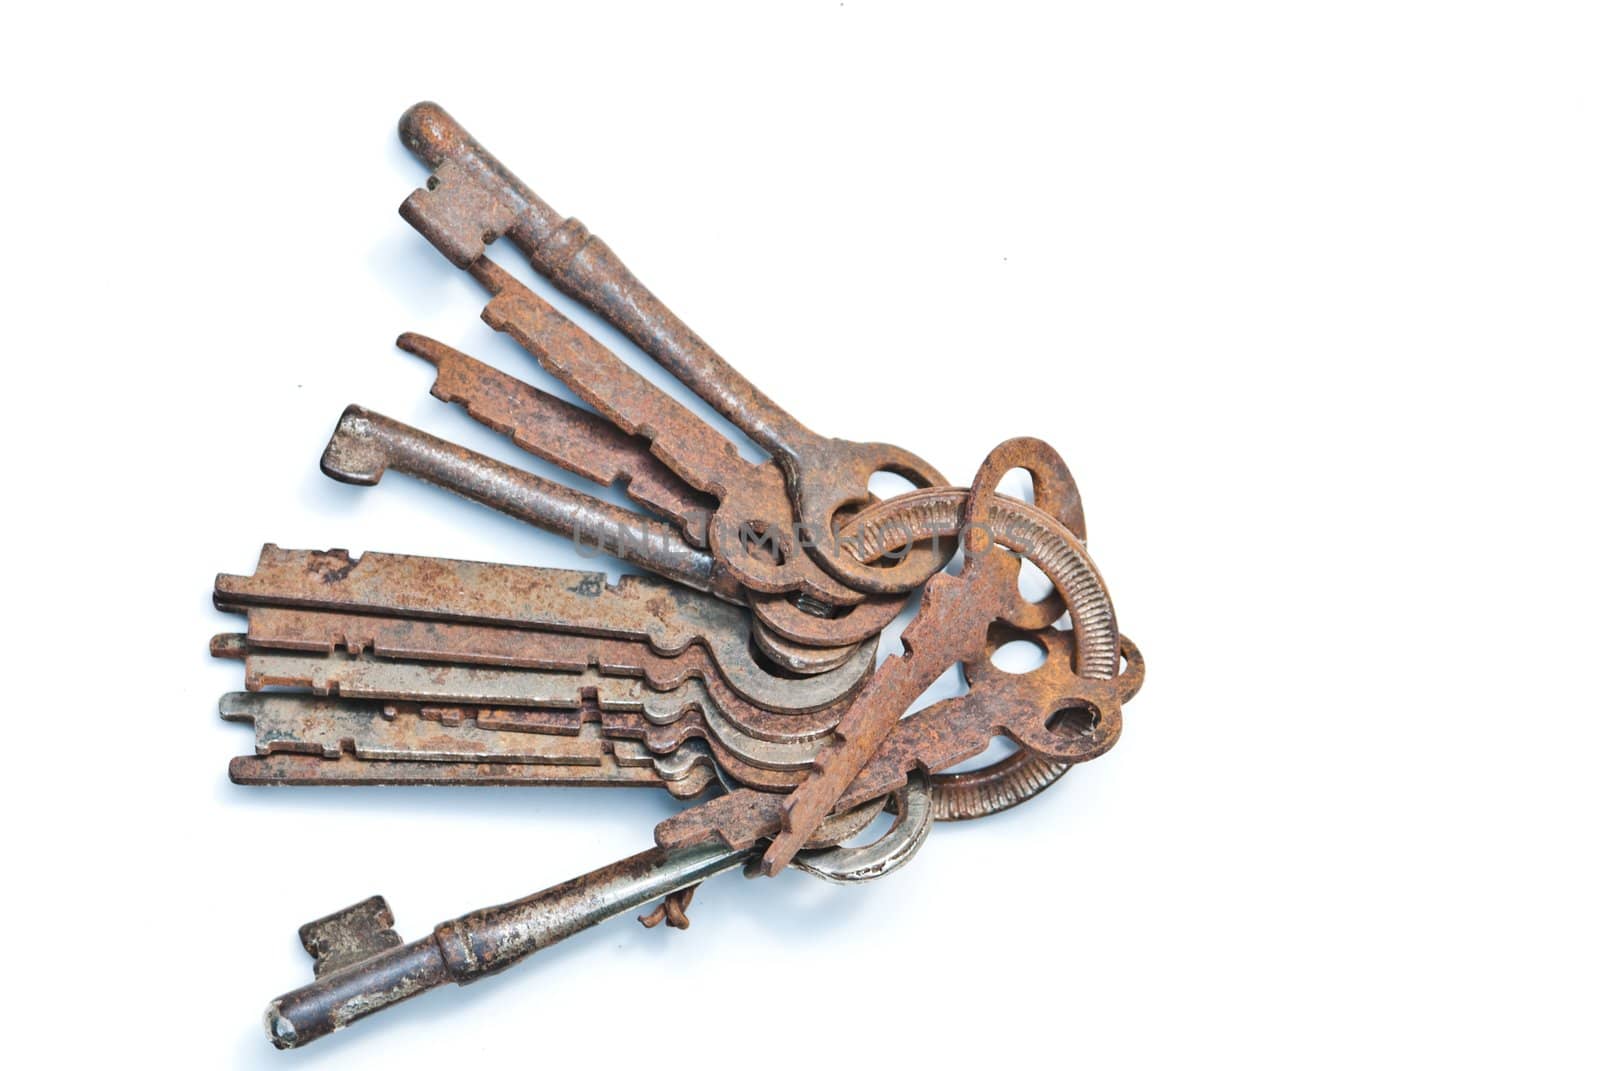 Old keys in isolated white background
 by sasilsolutions